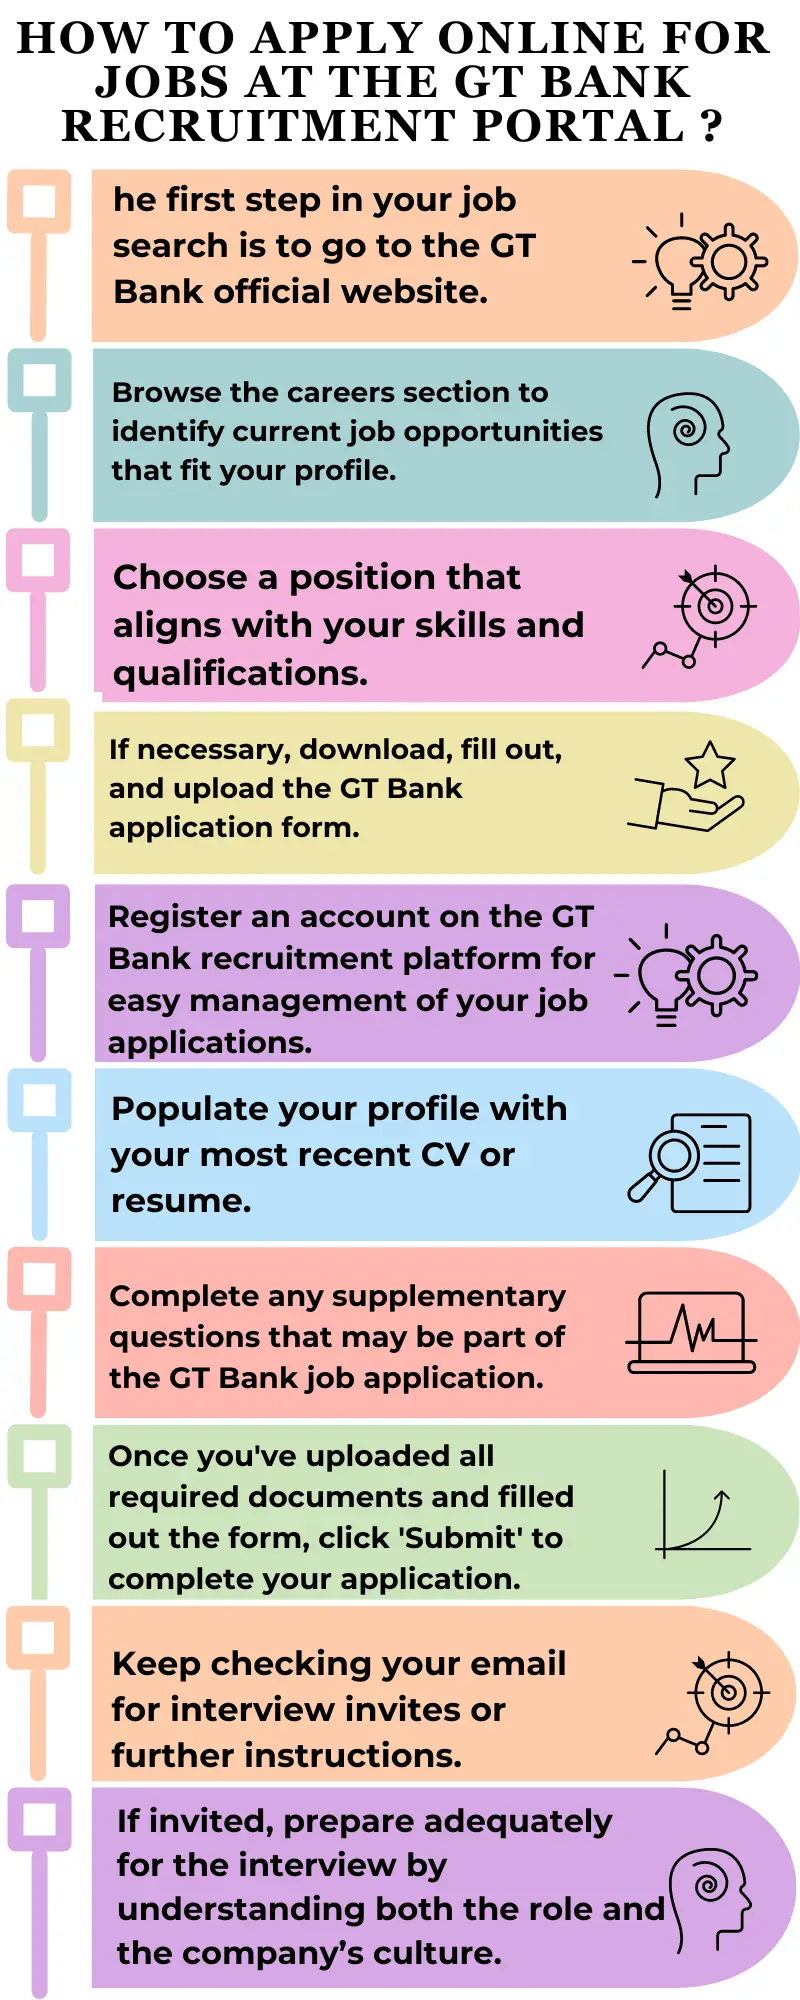 How to Apply Online for Jobs at the GT Bank Recruitment Portal ?